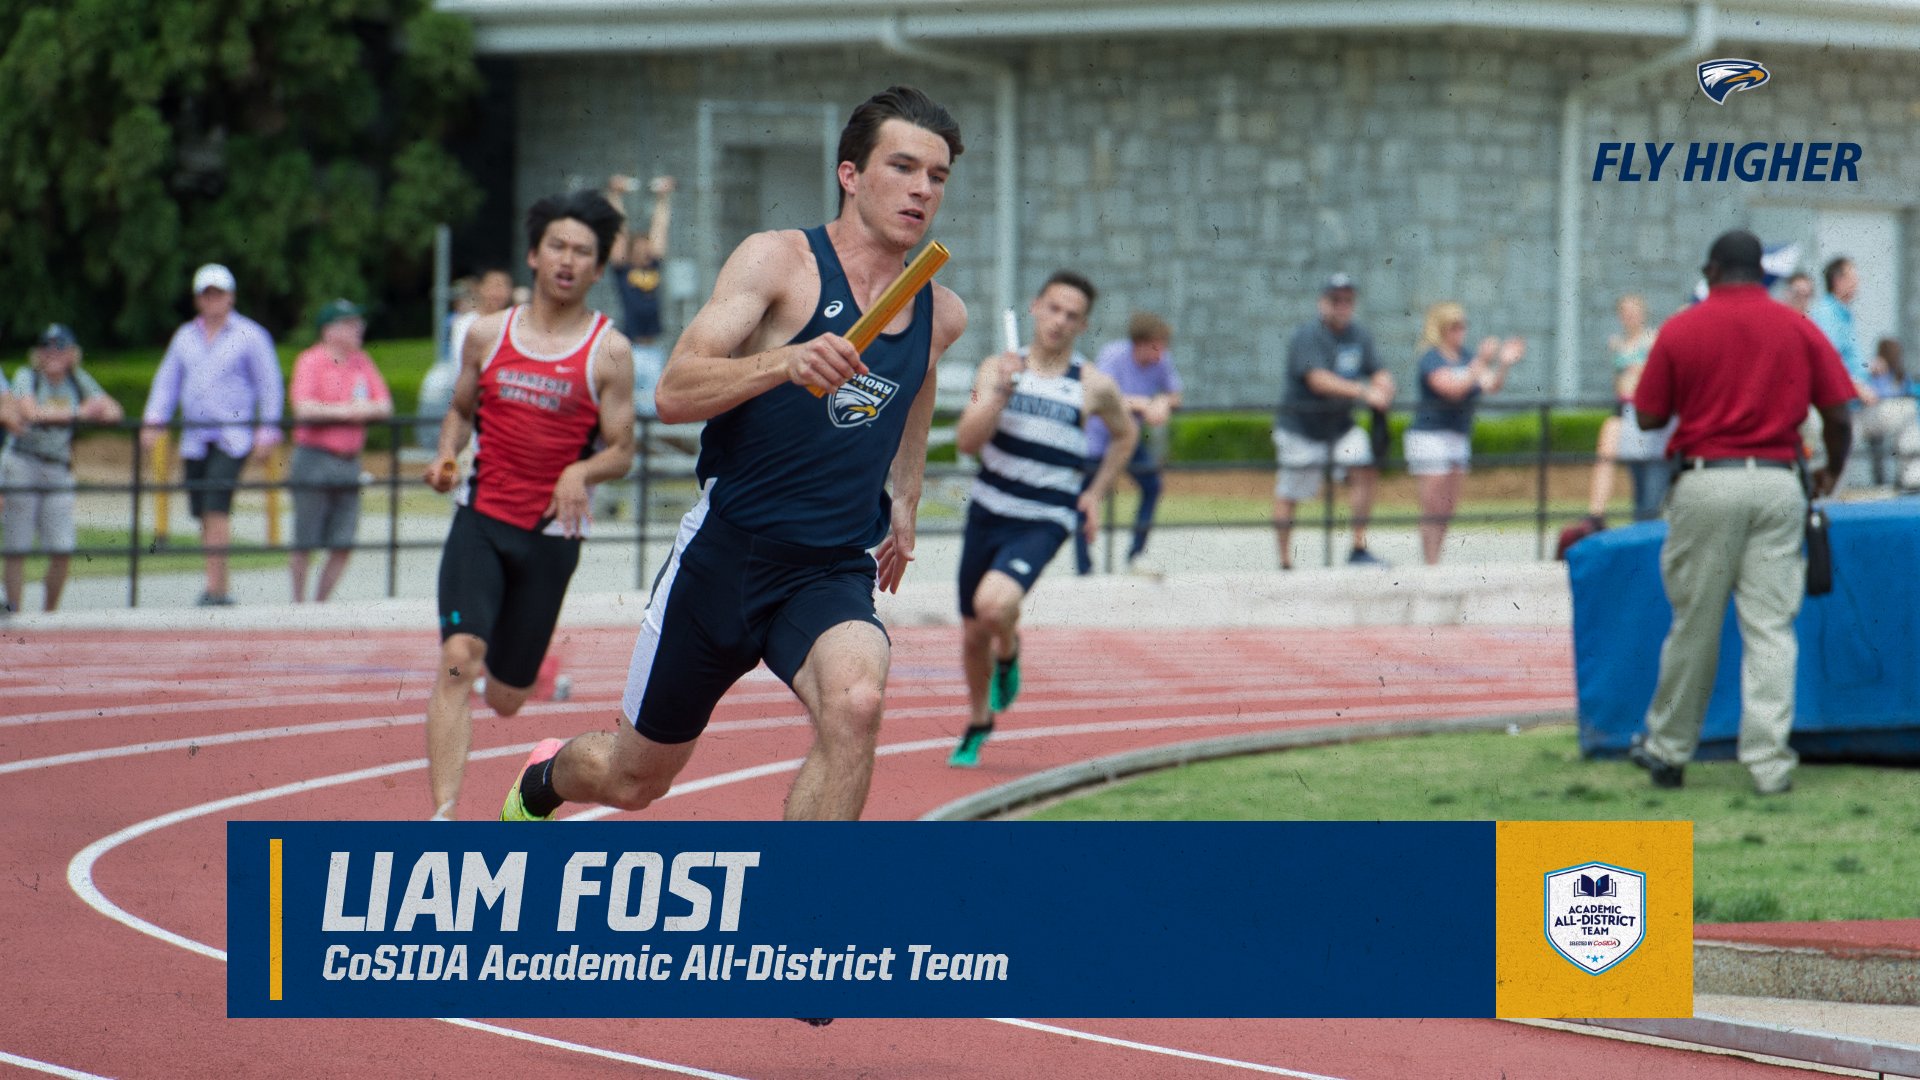 Liam Fost Selected to CoSIDA Academic All-District Team